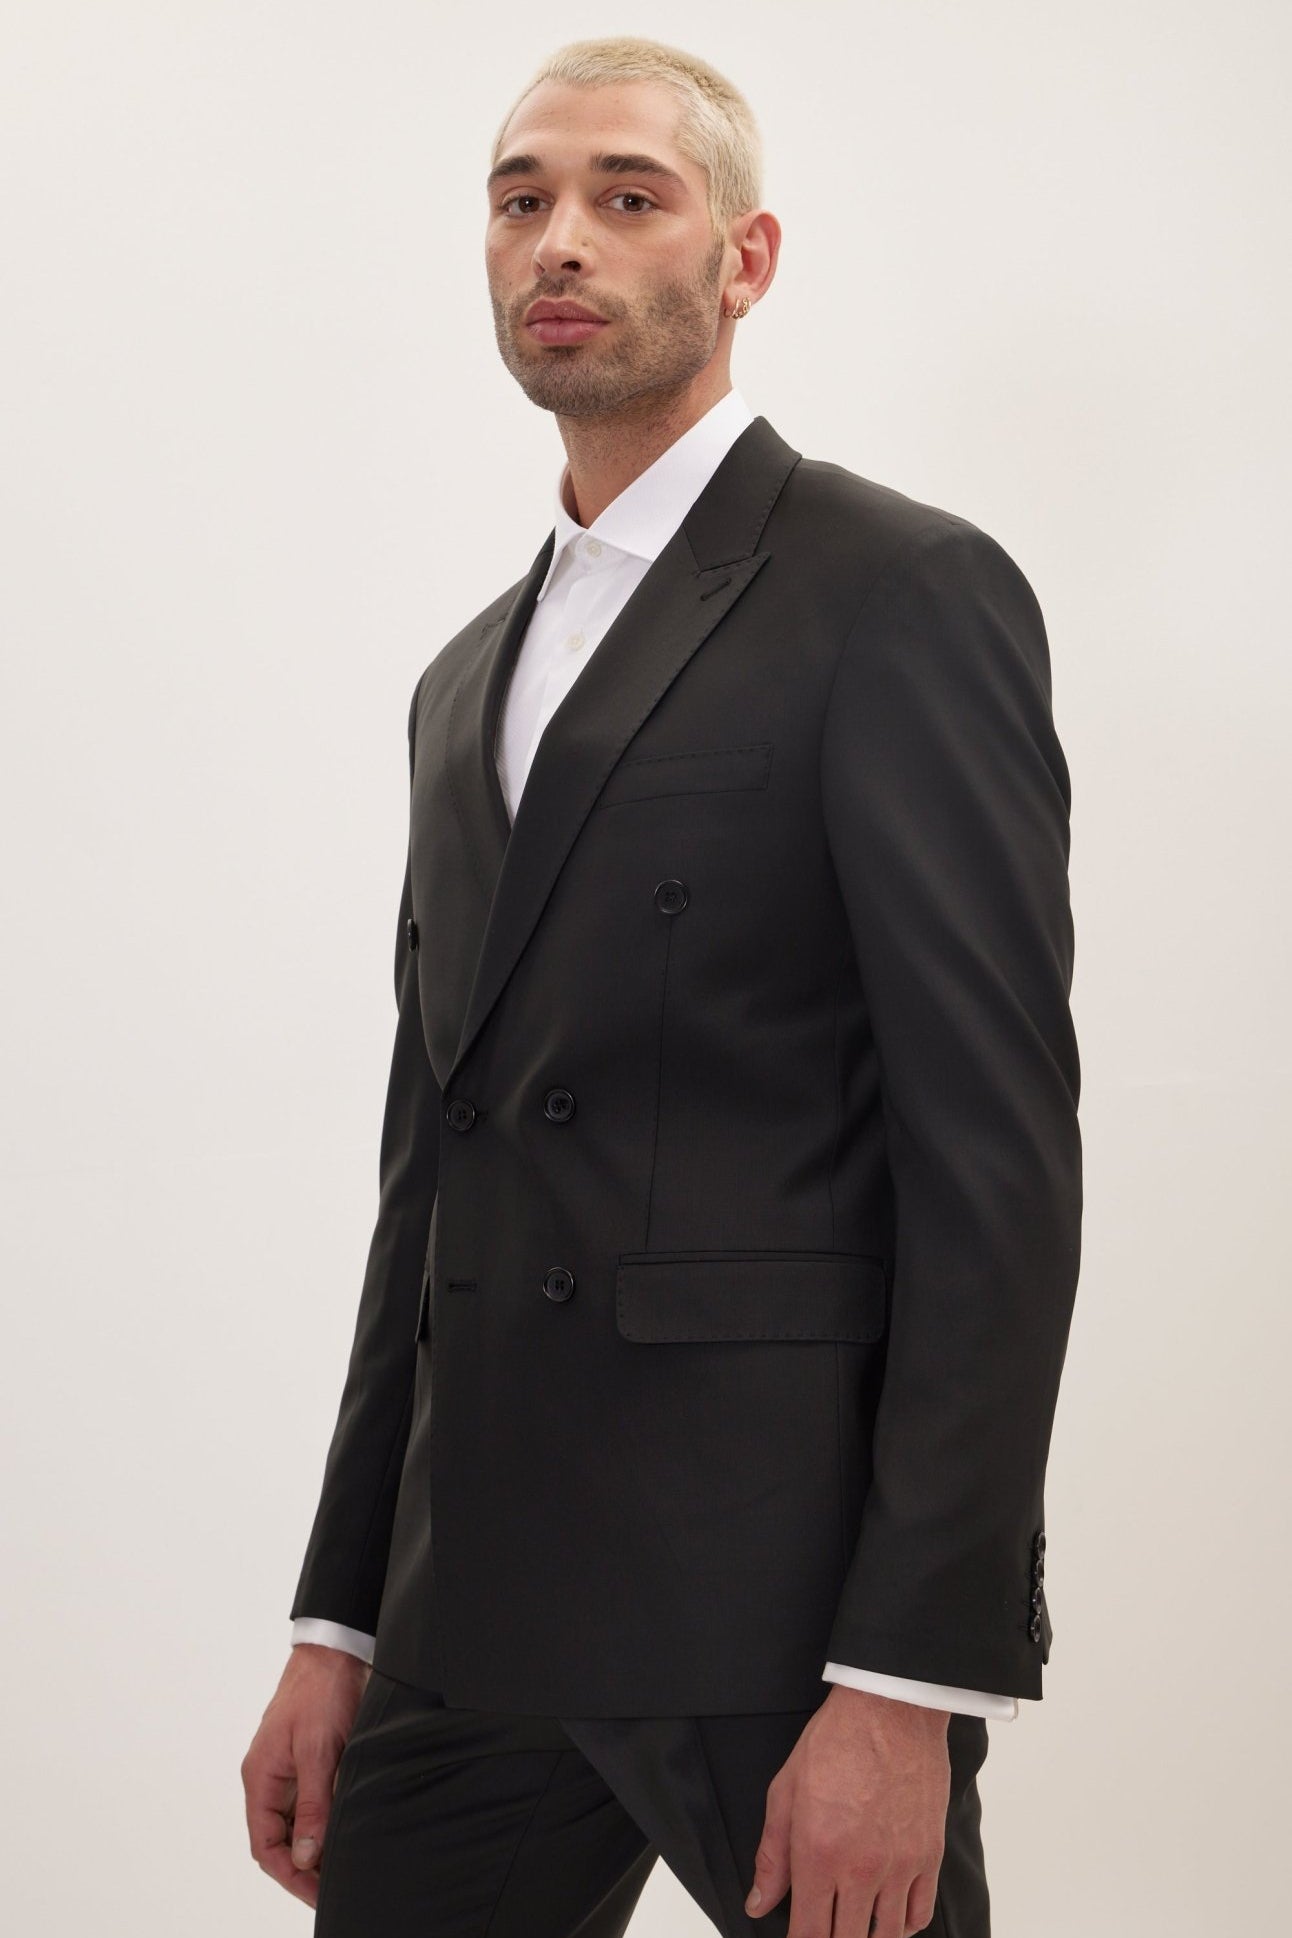 Super 120S Merino Wool Double Breasted Suit - Jet Black - Ron Tomson